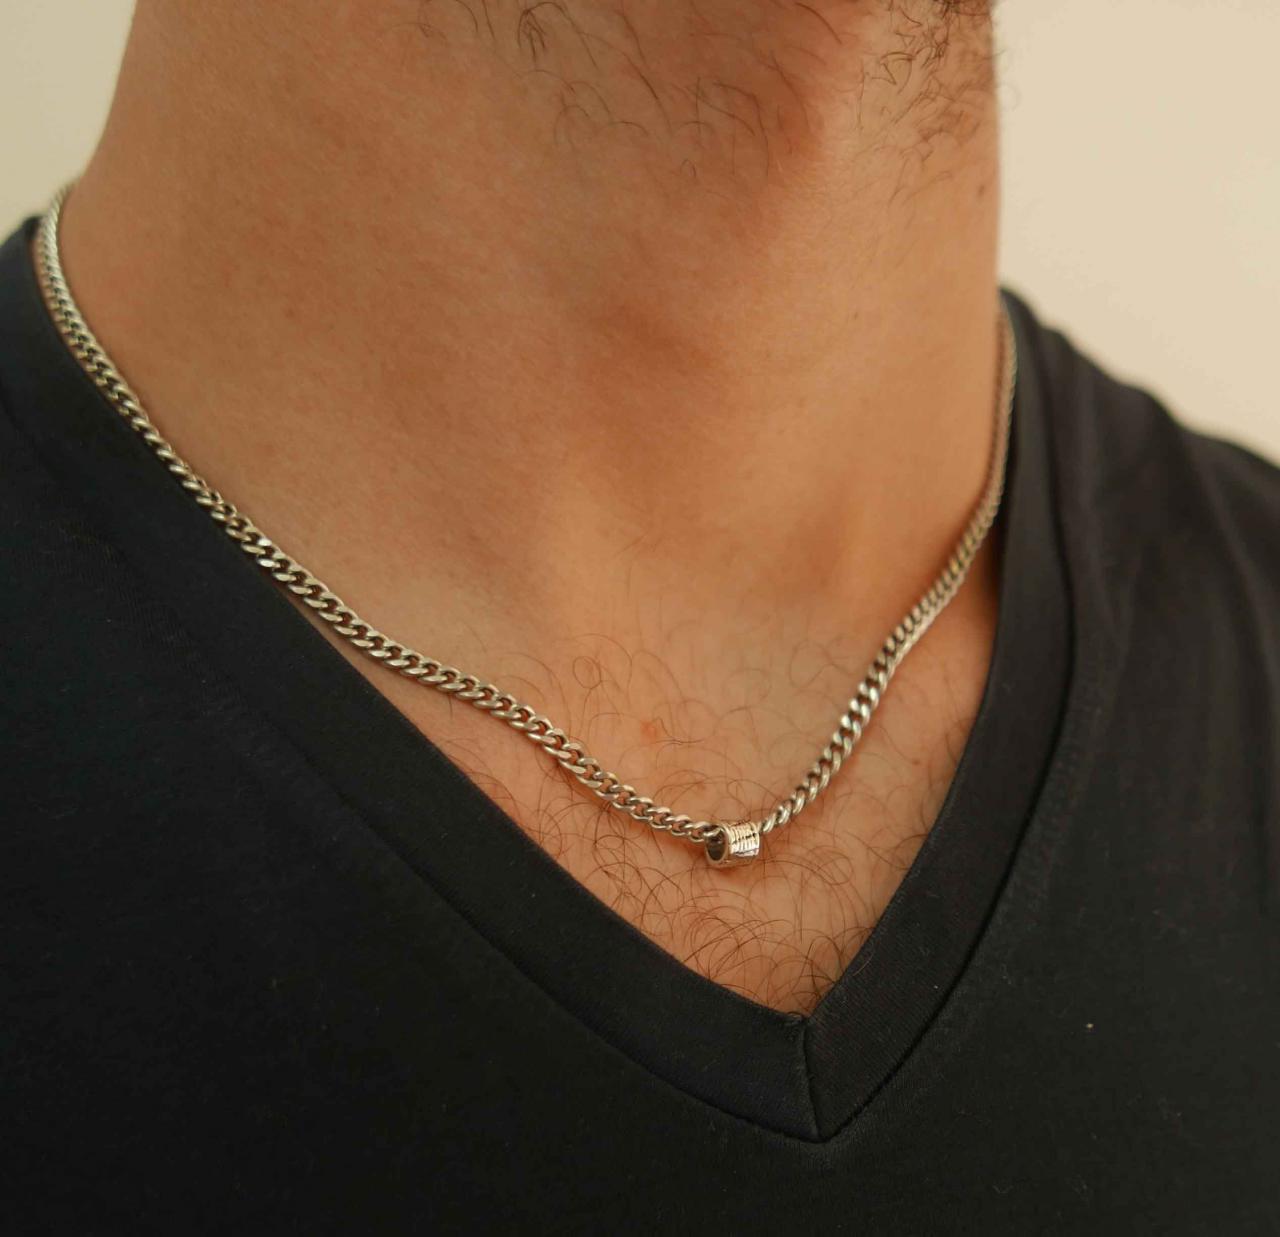 Men's Necklace - Men's Beaded Necklace - Men's Silver Necklace - Mens Jewelry - Men's Gift - Husband Gift -